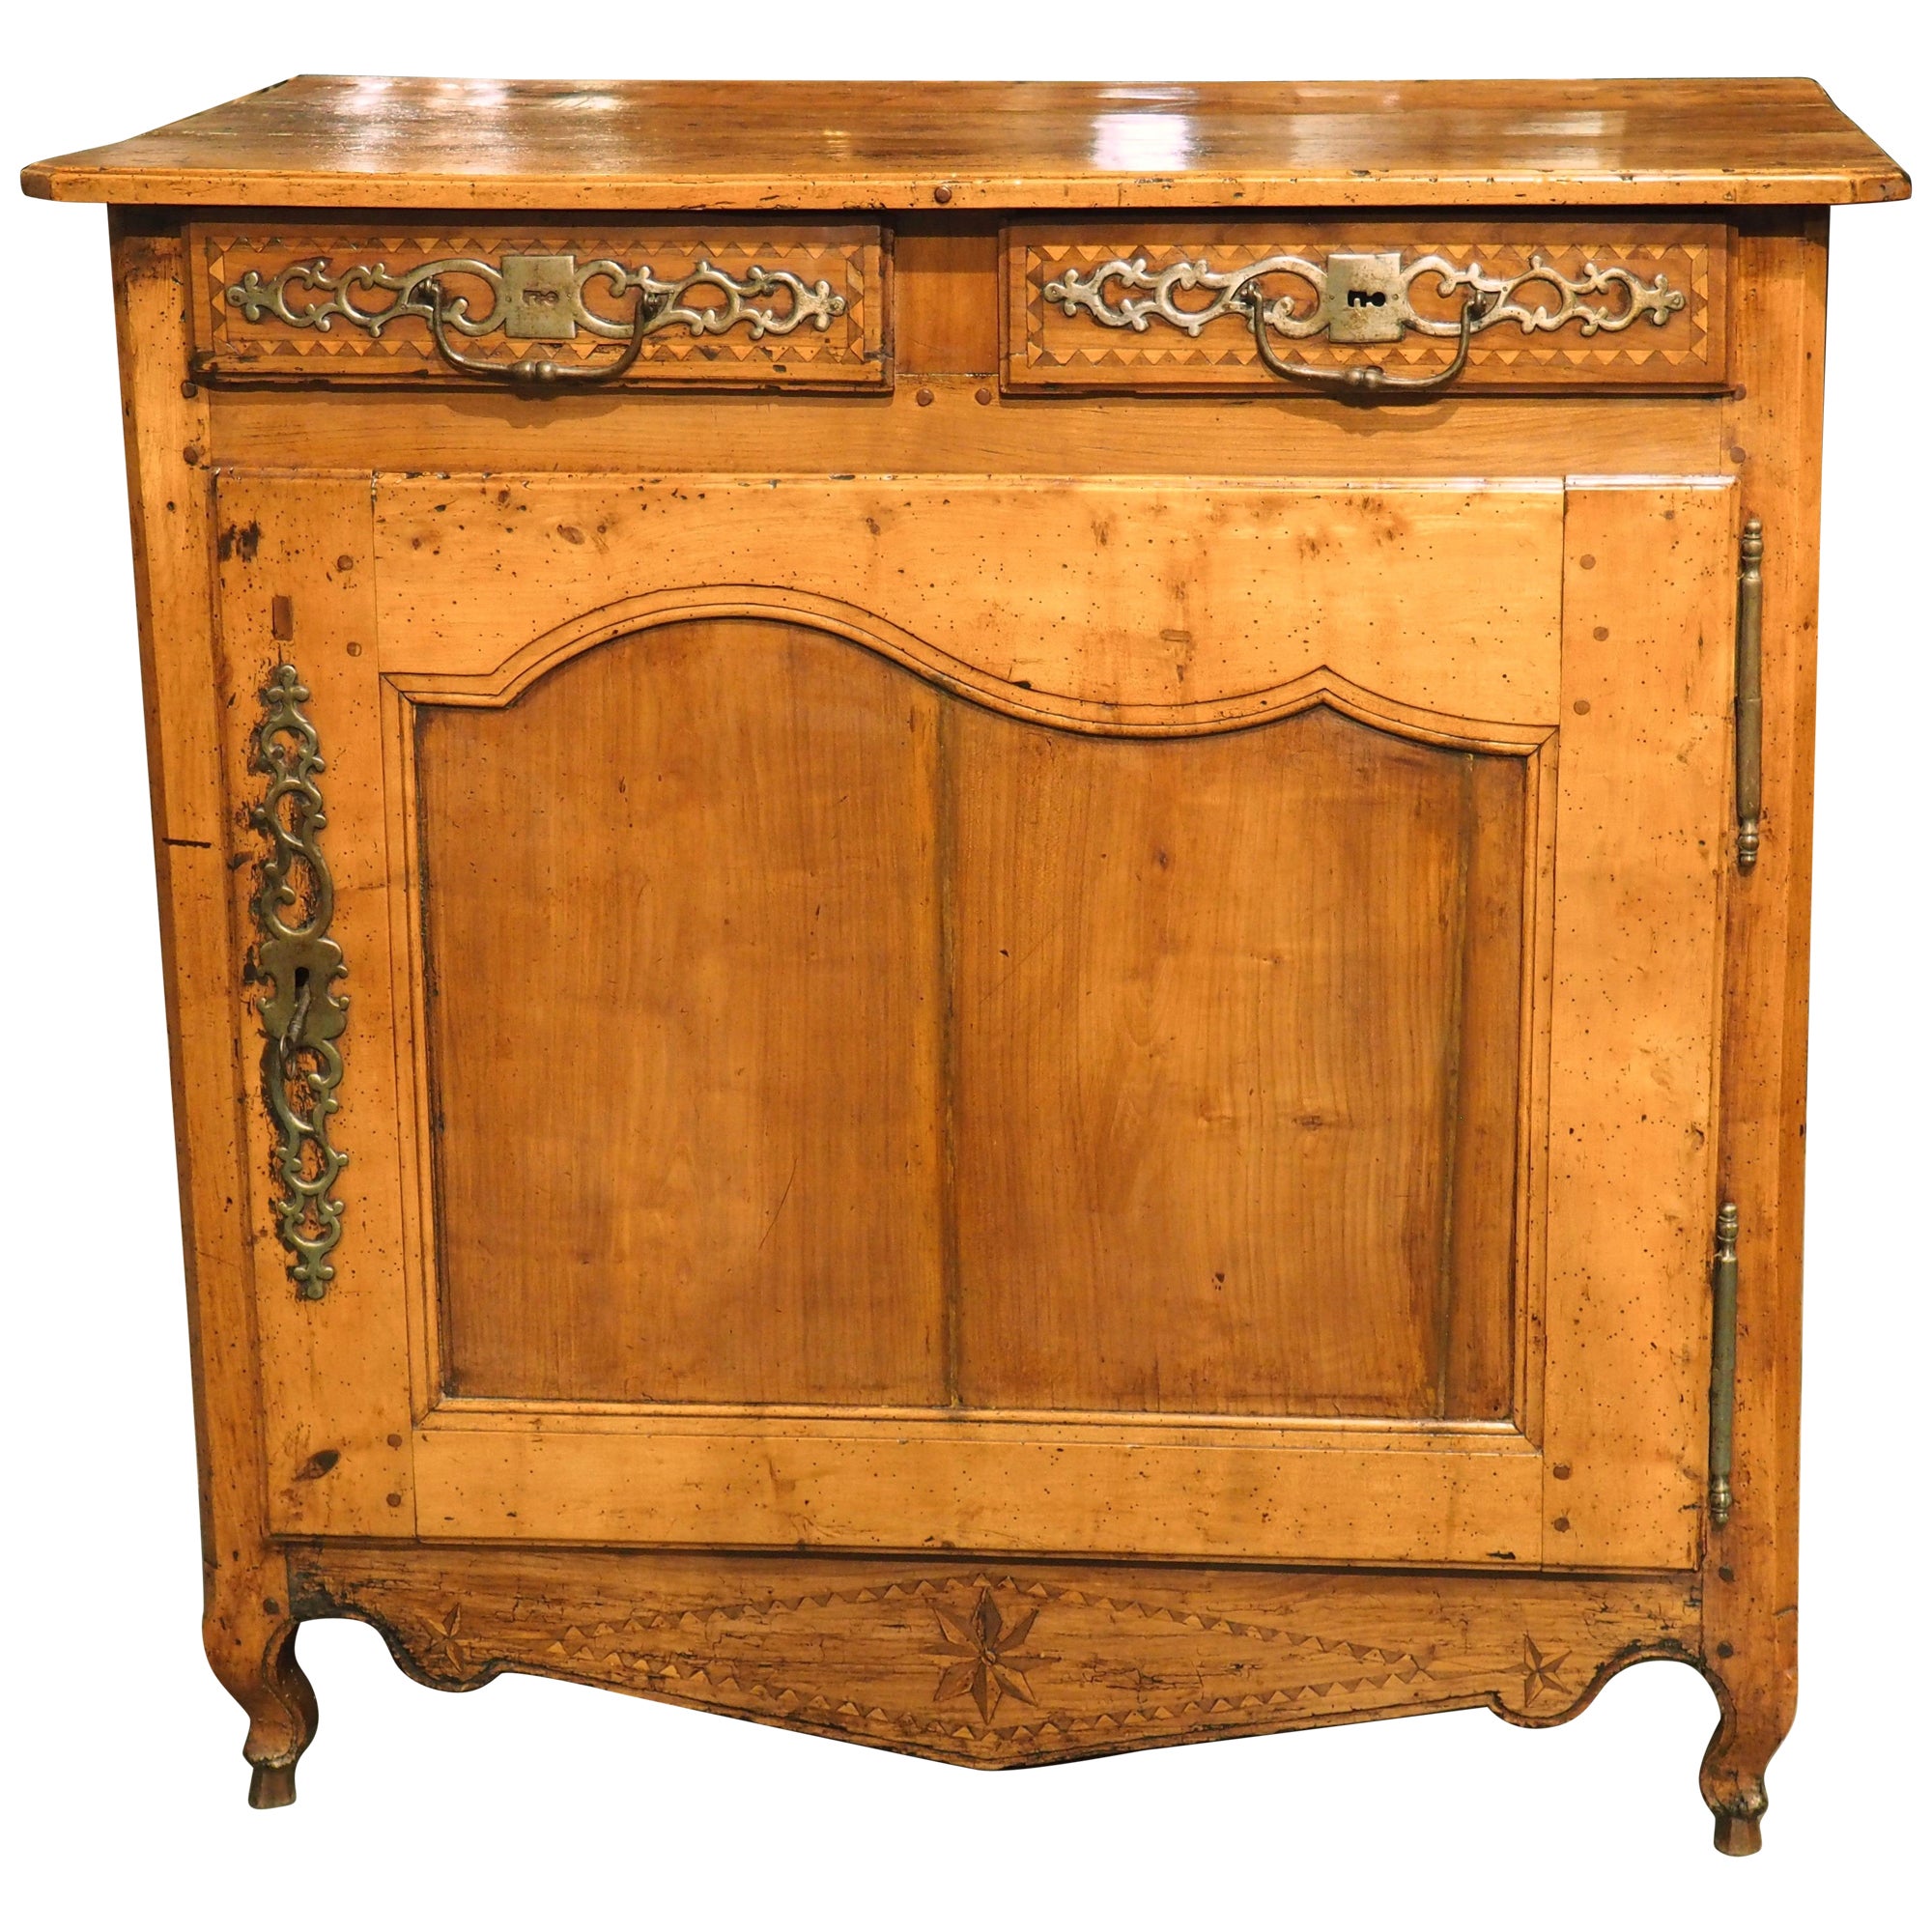 18th Century French Confiturier Cabinet in Carved Cherrywood